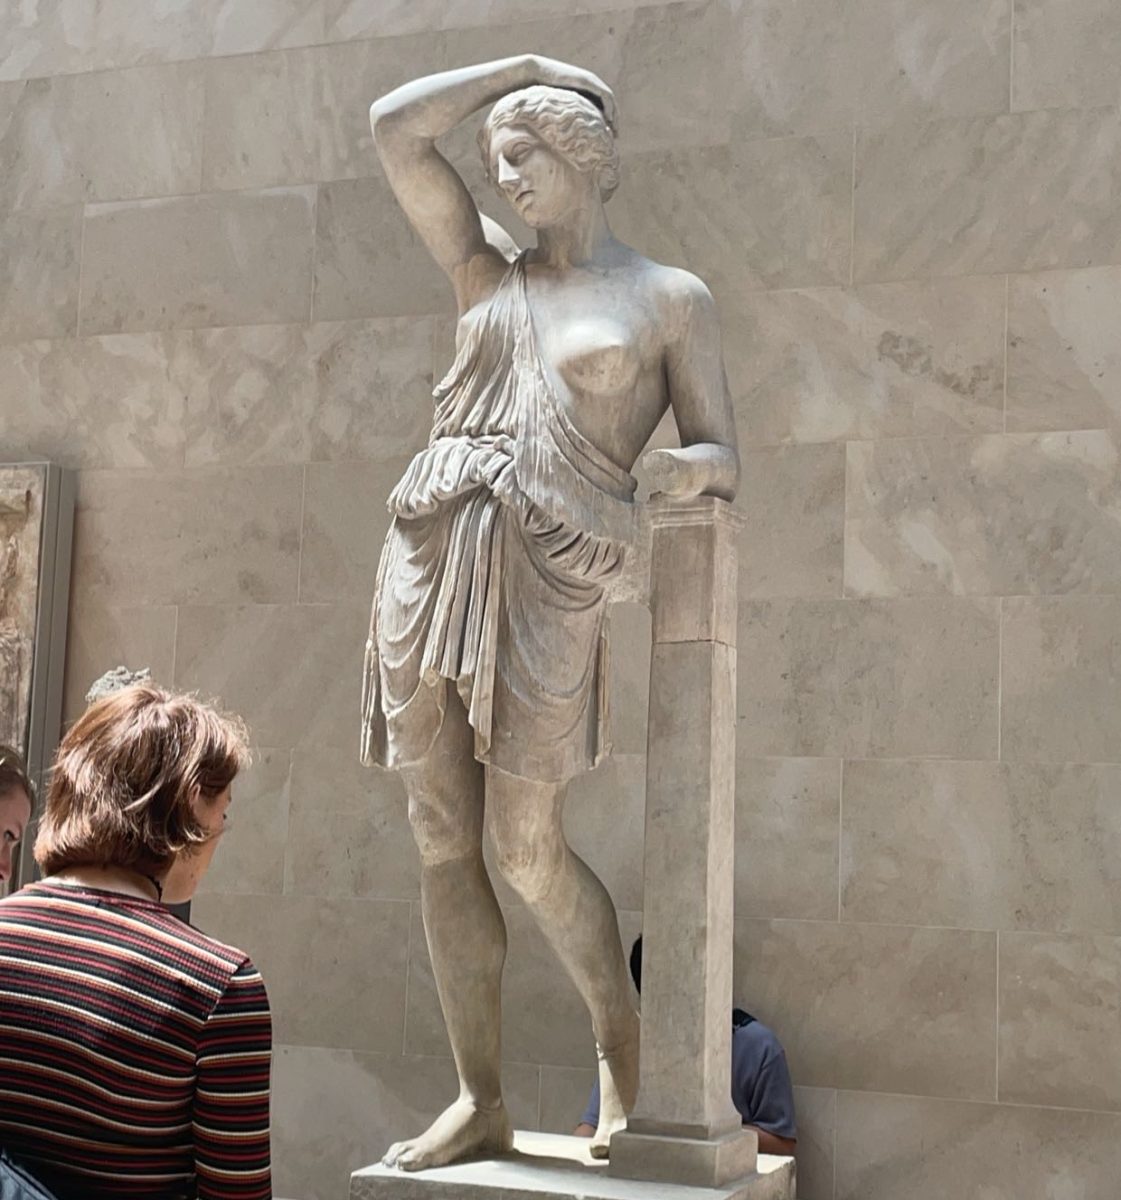 Marble+statue+of+a+woman+from+ancient+Greece+in+the+Metropolitan+Museum+of+Art.